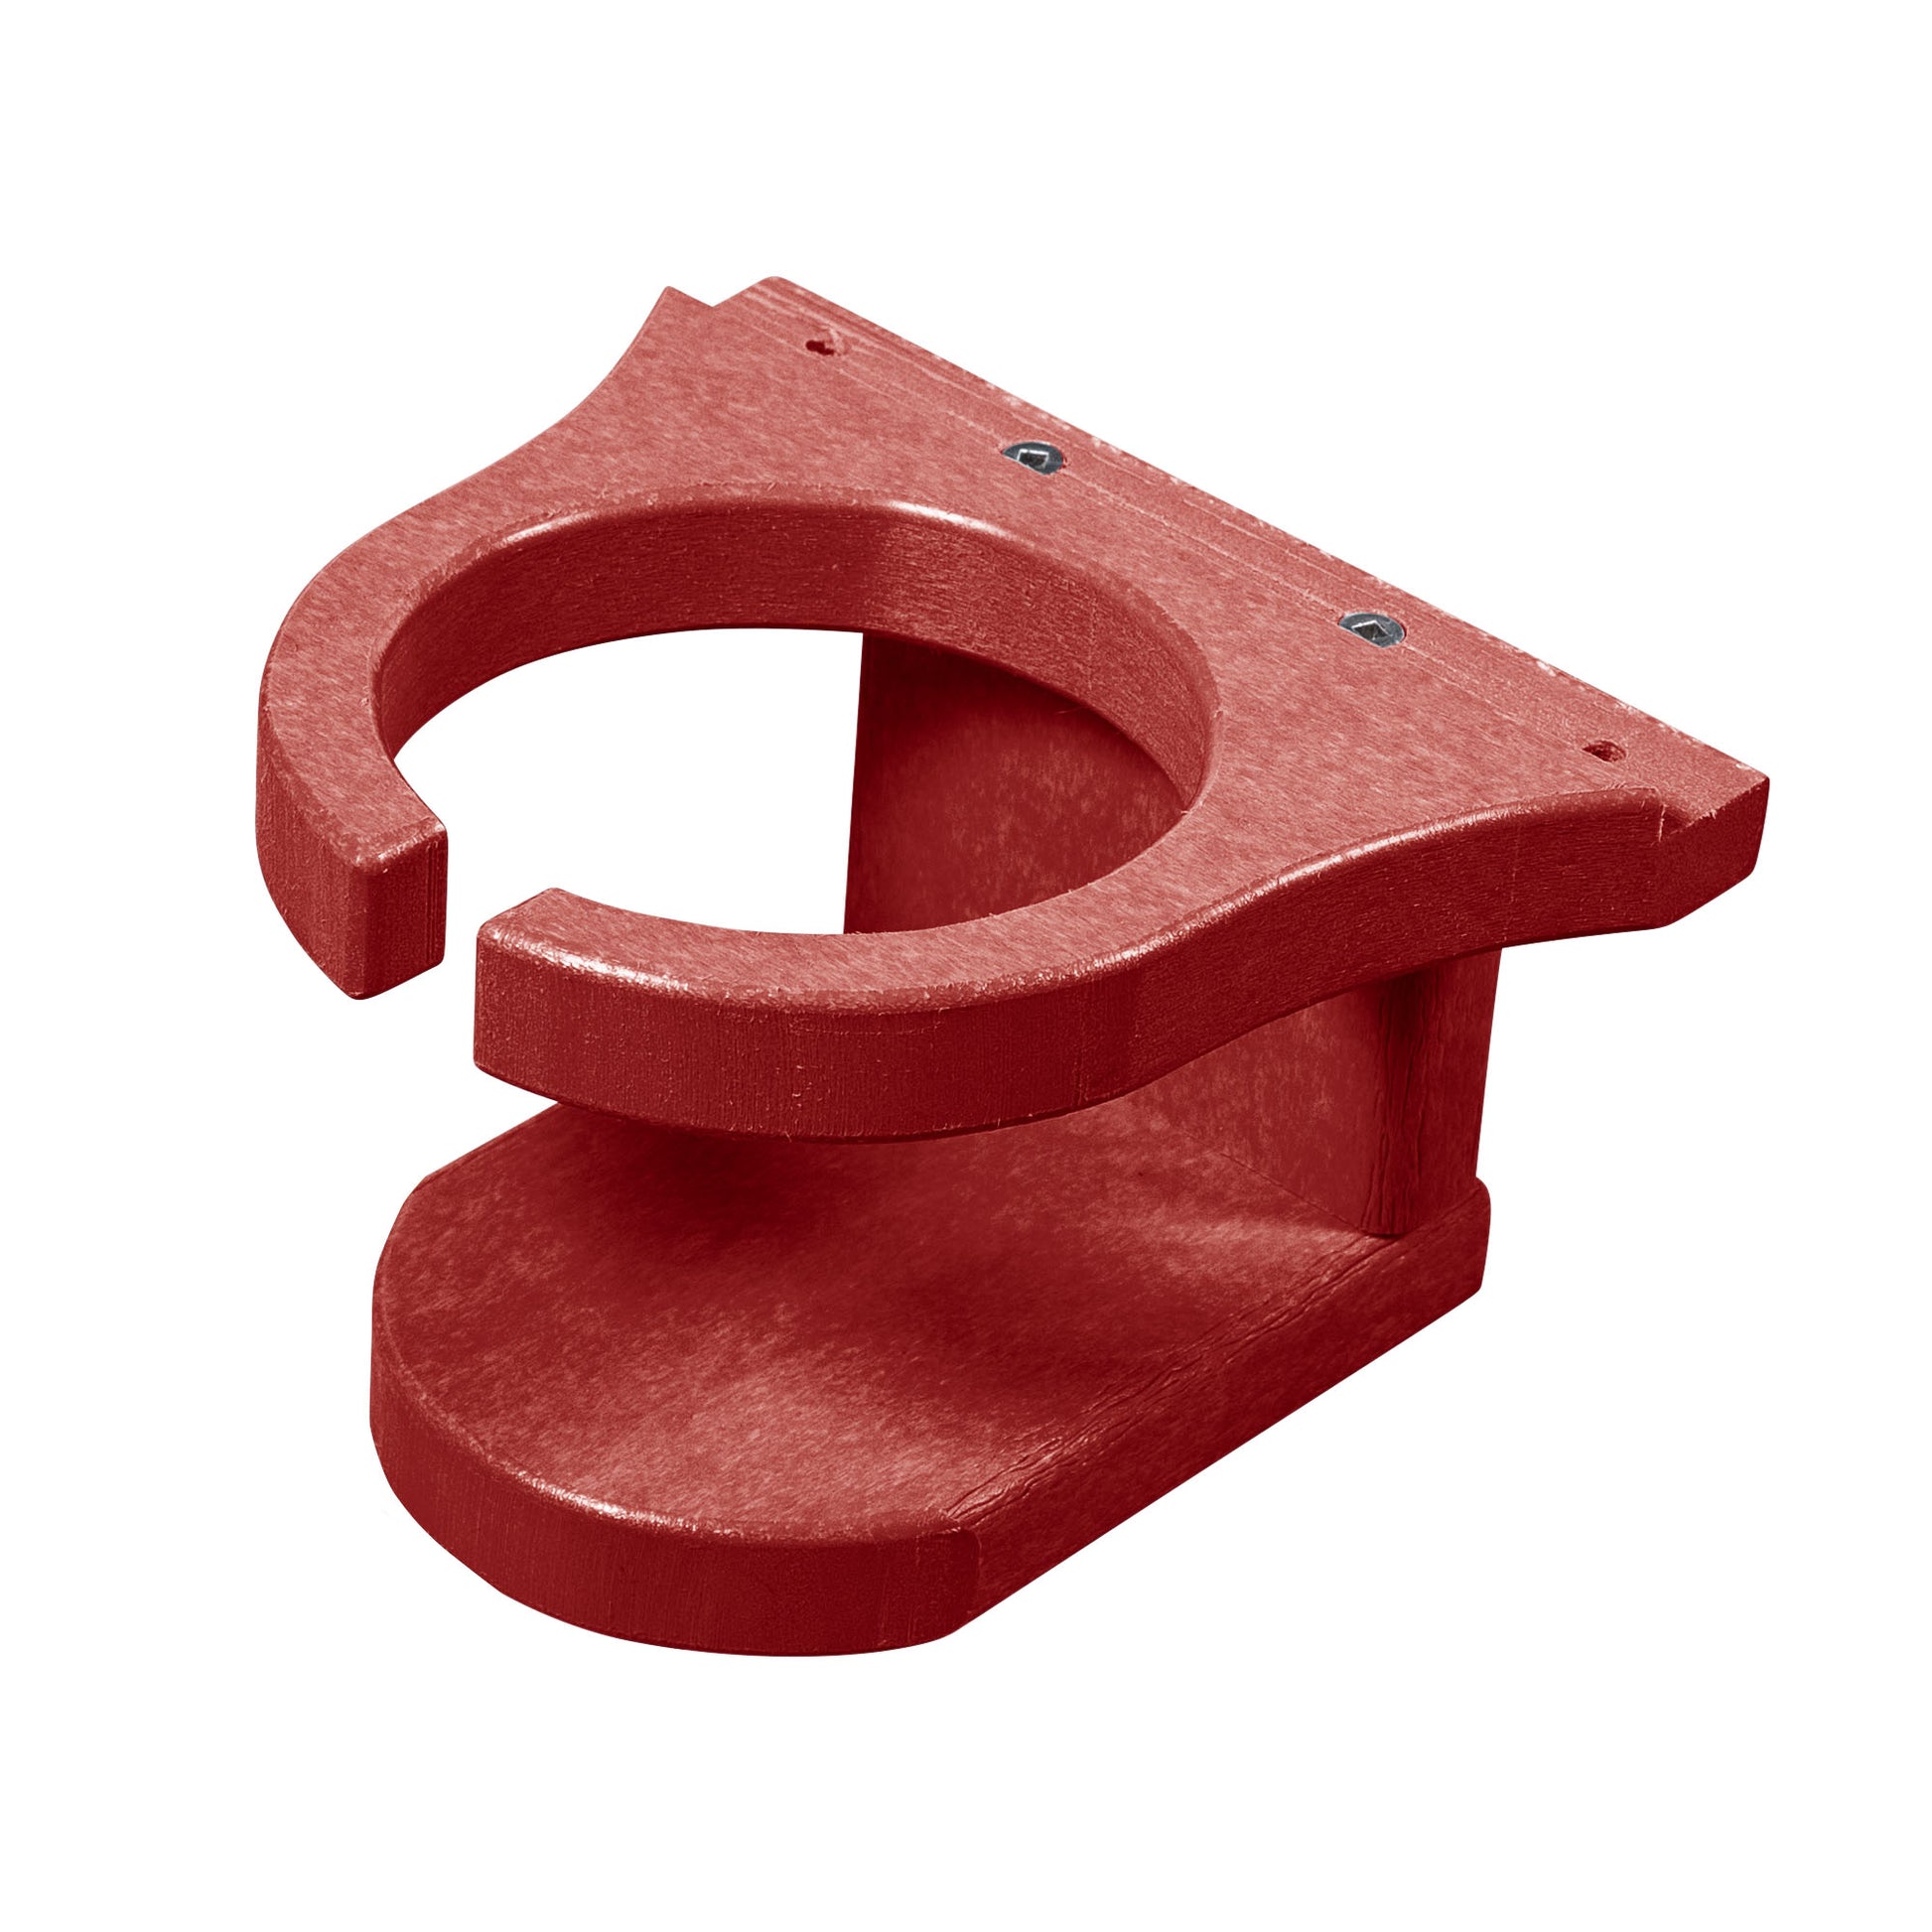 Sunrise Coast cup holder in Boathouse Red